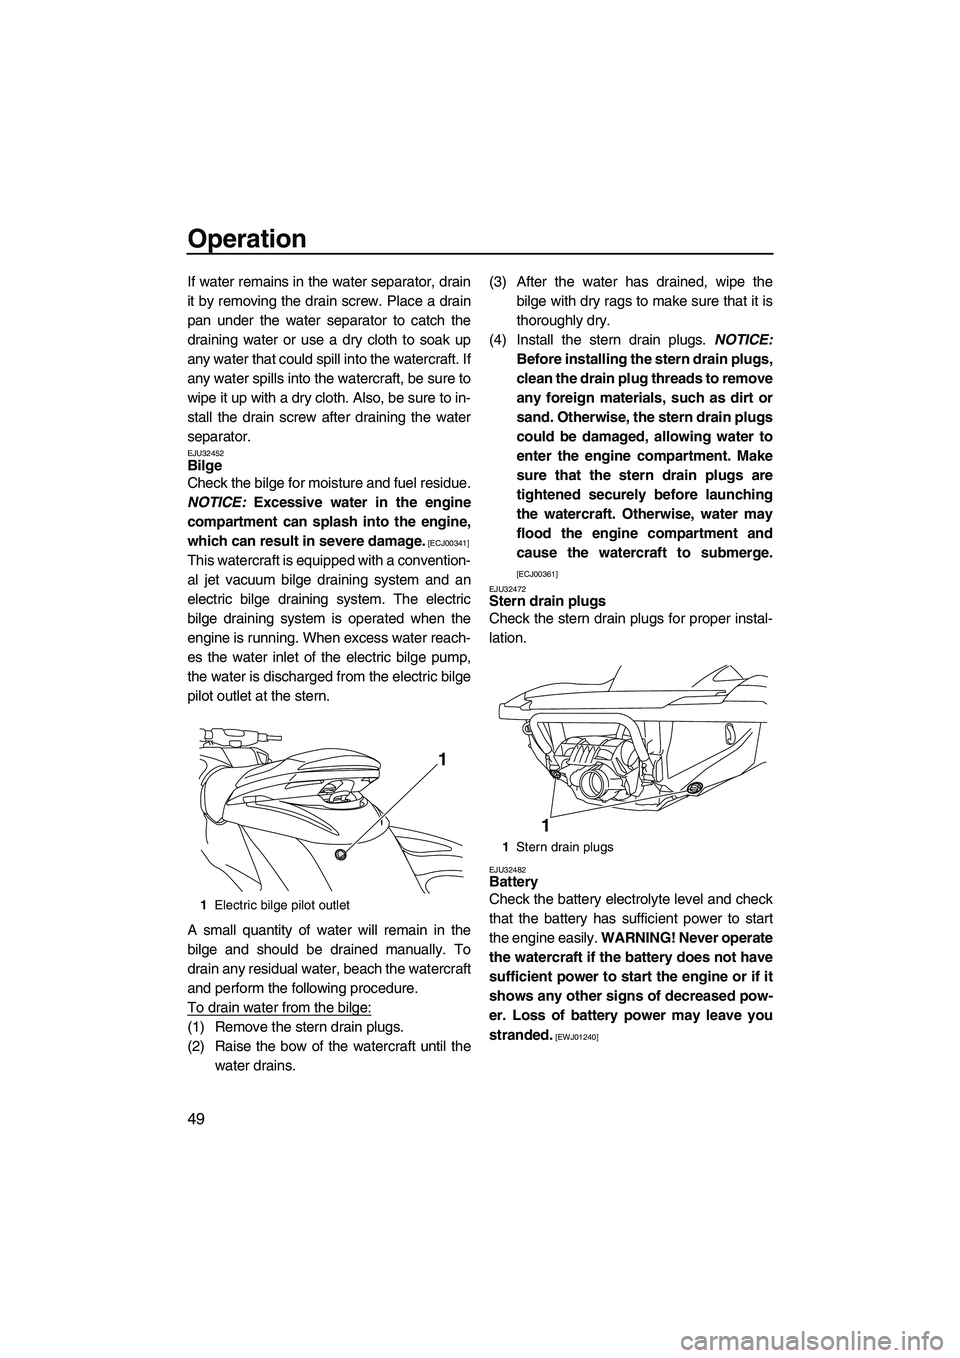 YAMAHA FZS SVHO 2009  Owners Manual Operation
49
If water remains in the water separator, drain
it by removing the drain screw. Place a drain
pan under the water separator to catch the
draining water or use a dry cloth to soak up
any wa